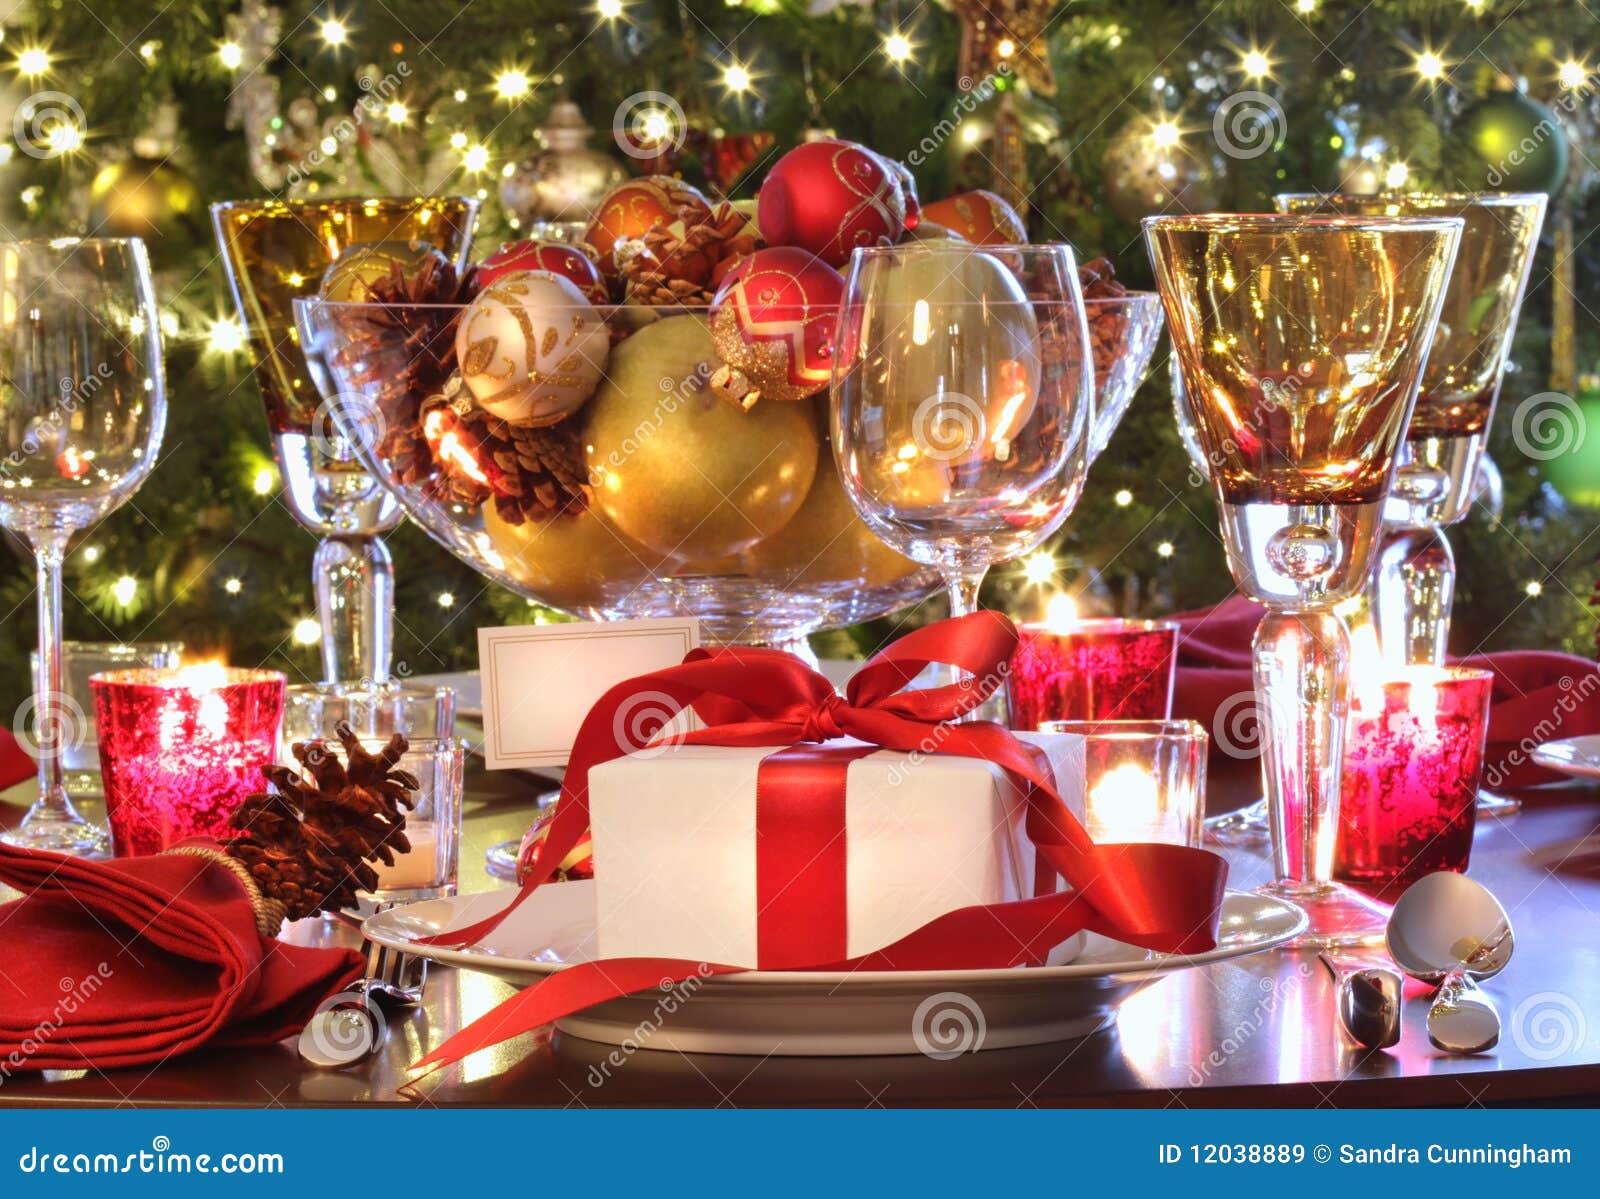 holiday table setting with red ribbon gift